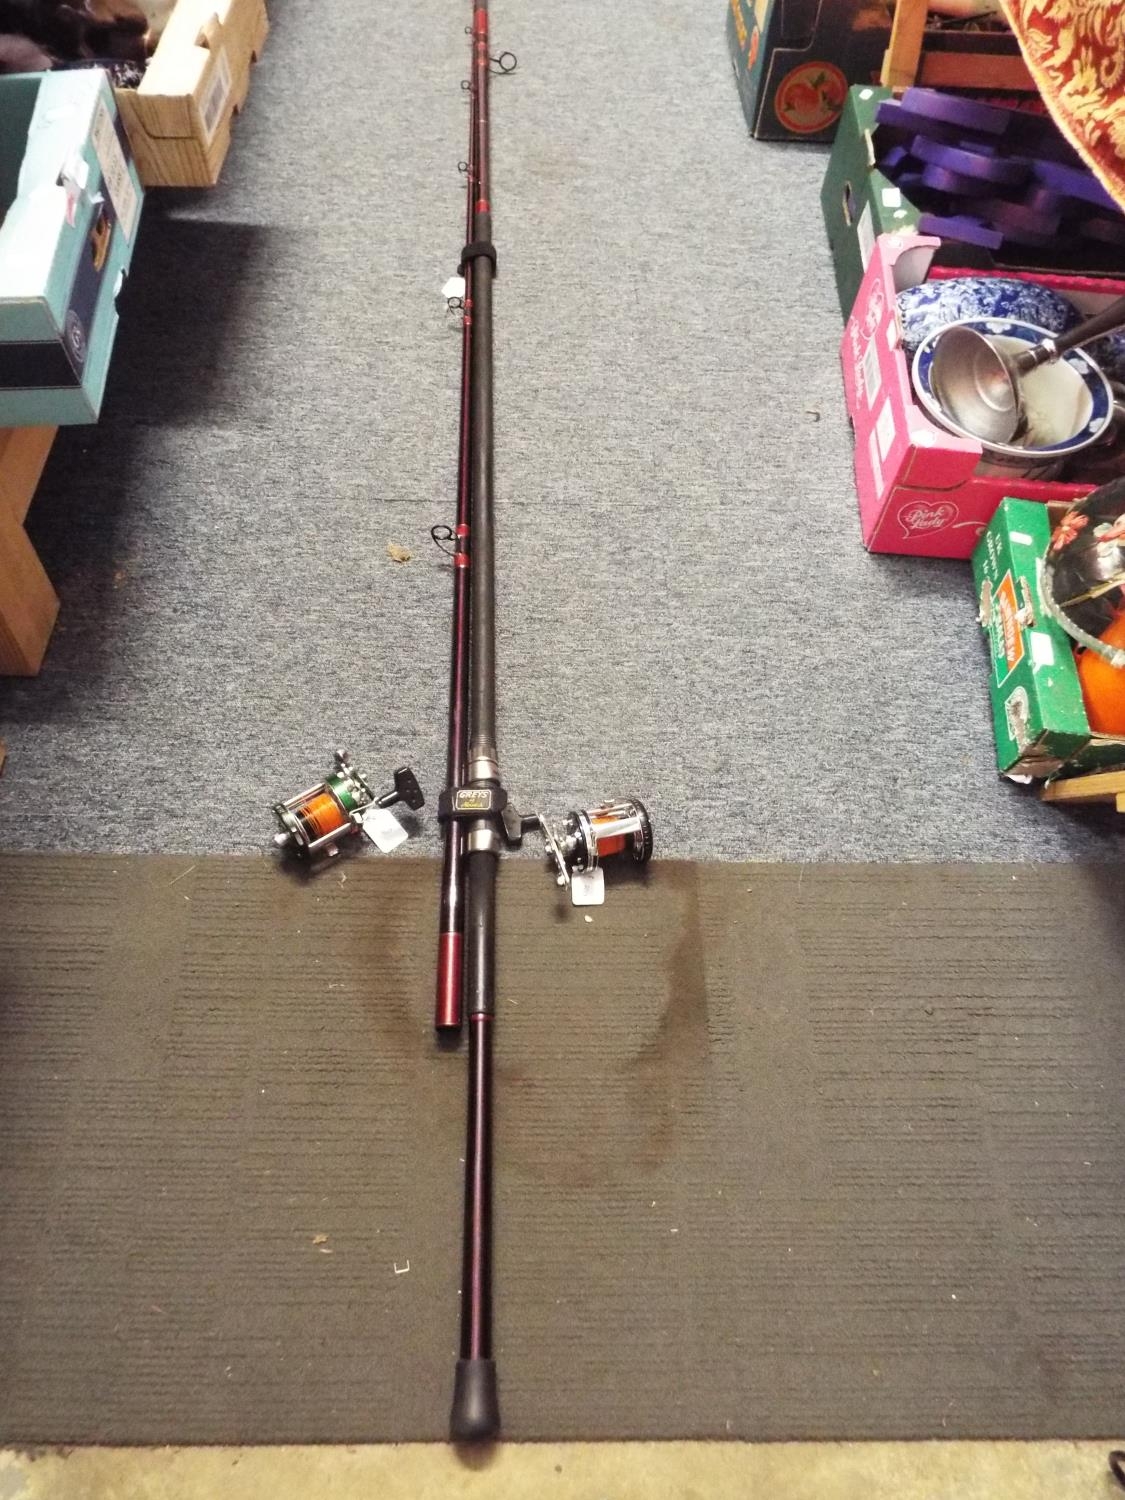 A Grey's 13ft 6 Syntra 6oz sea fishing rod together with an Abu